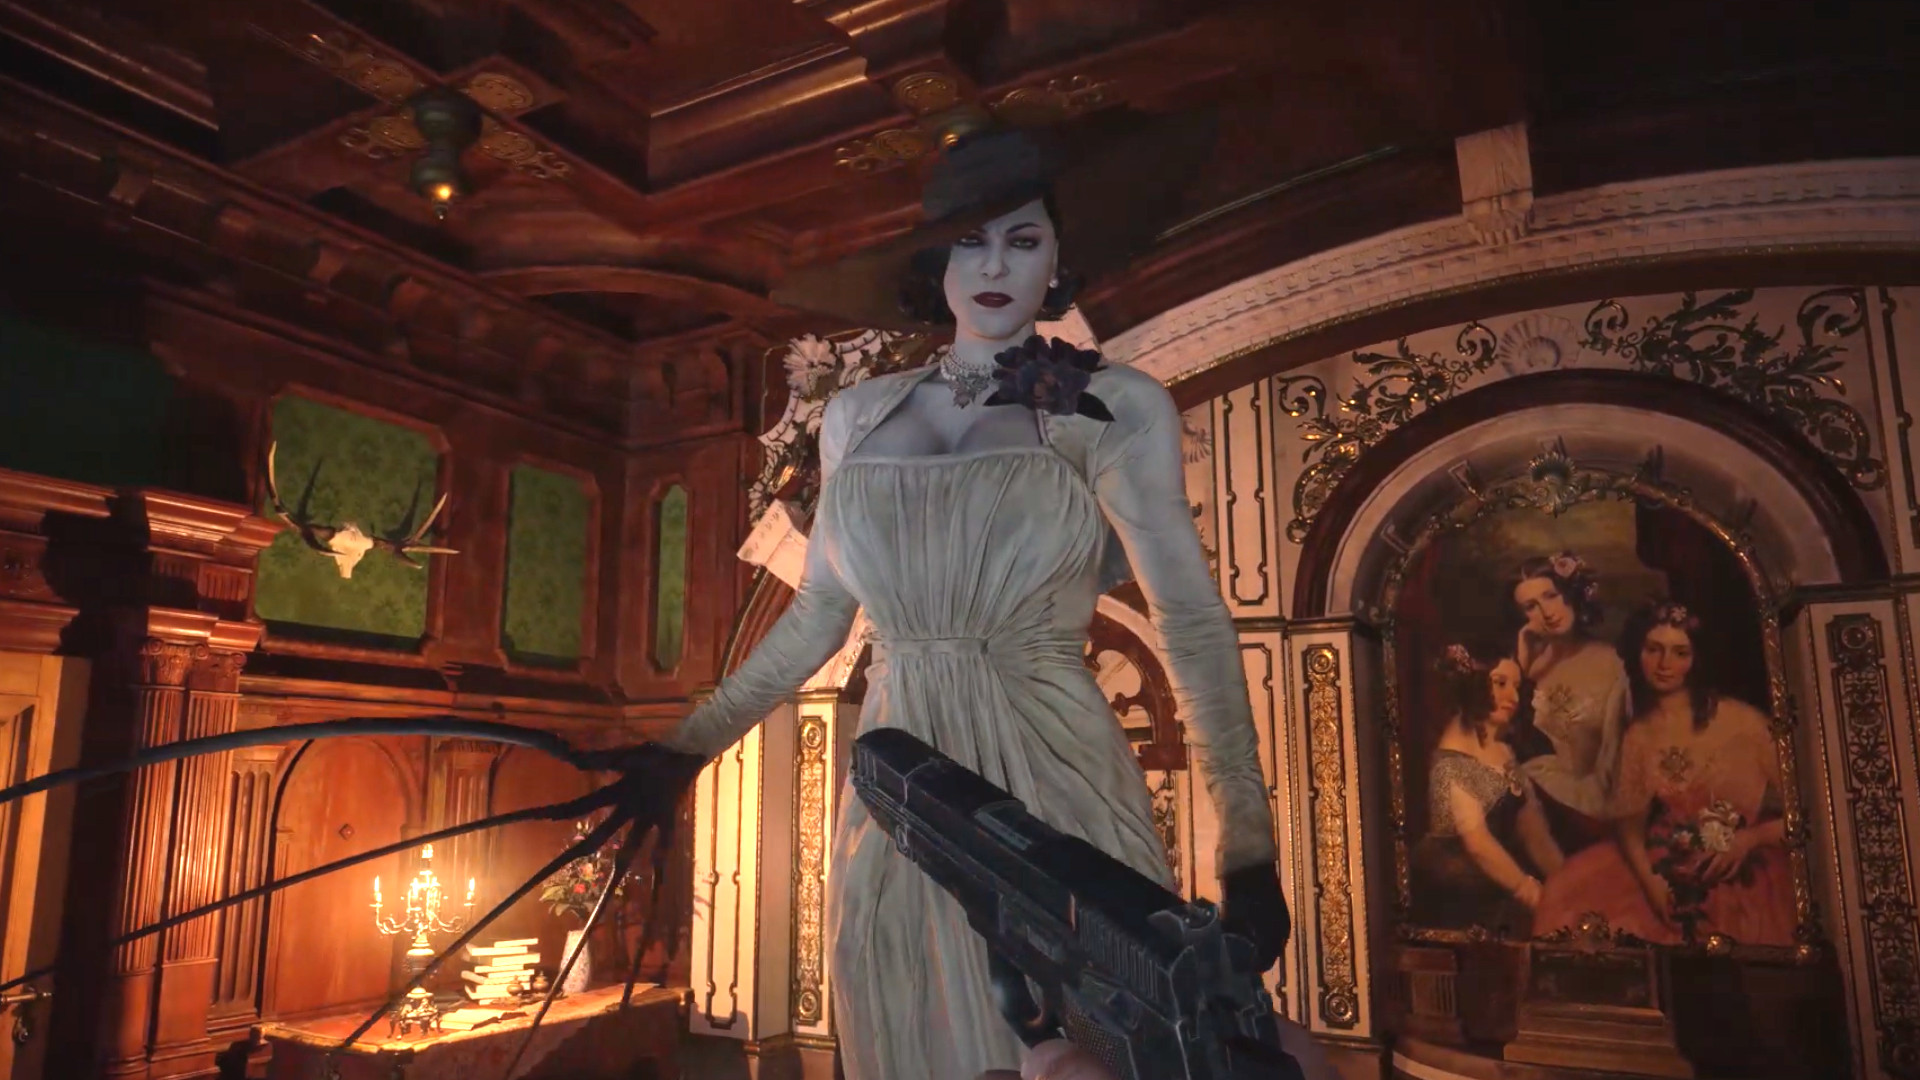 Lady Dimitrescu looks like an upgraded Mr. X in Resident Evil